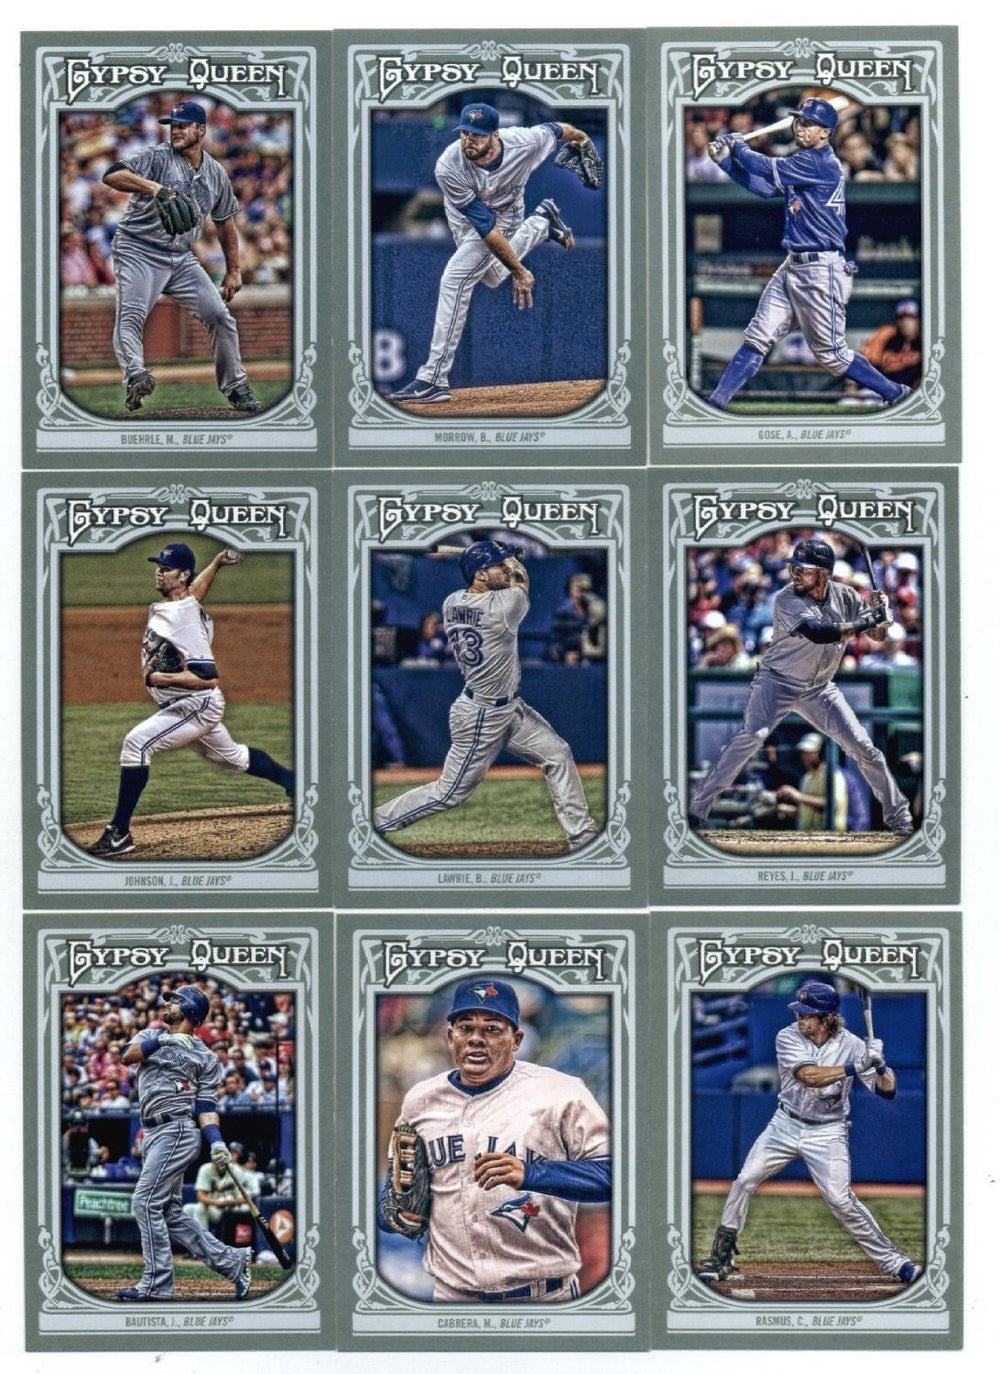 Toronto Blue Jays 2013 Topps GYPSY QUEEN Team Set with Jose